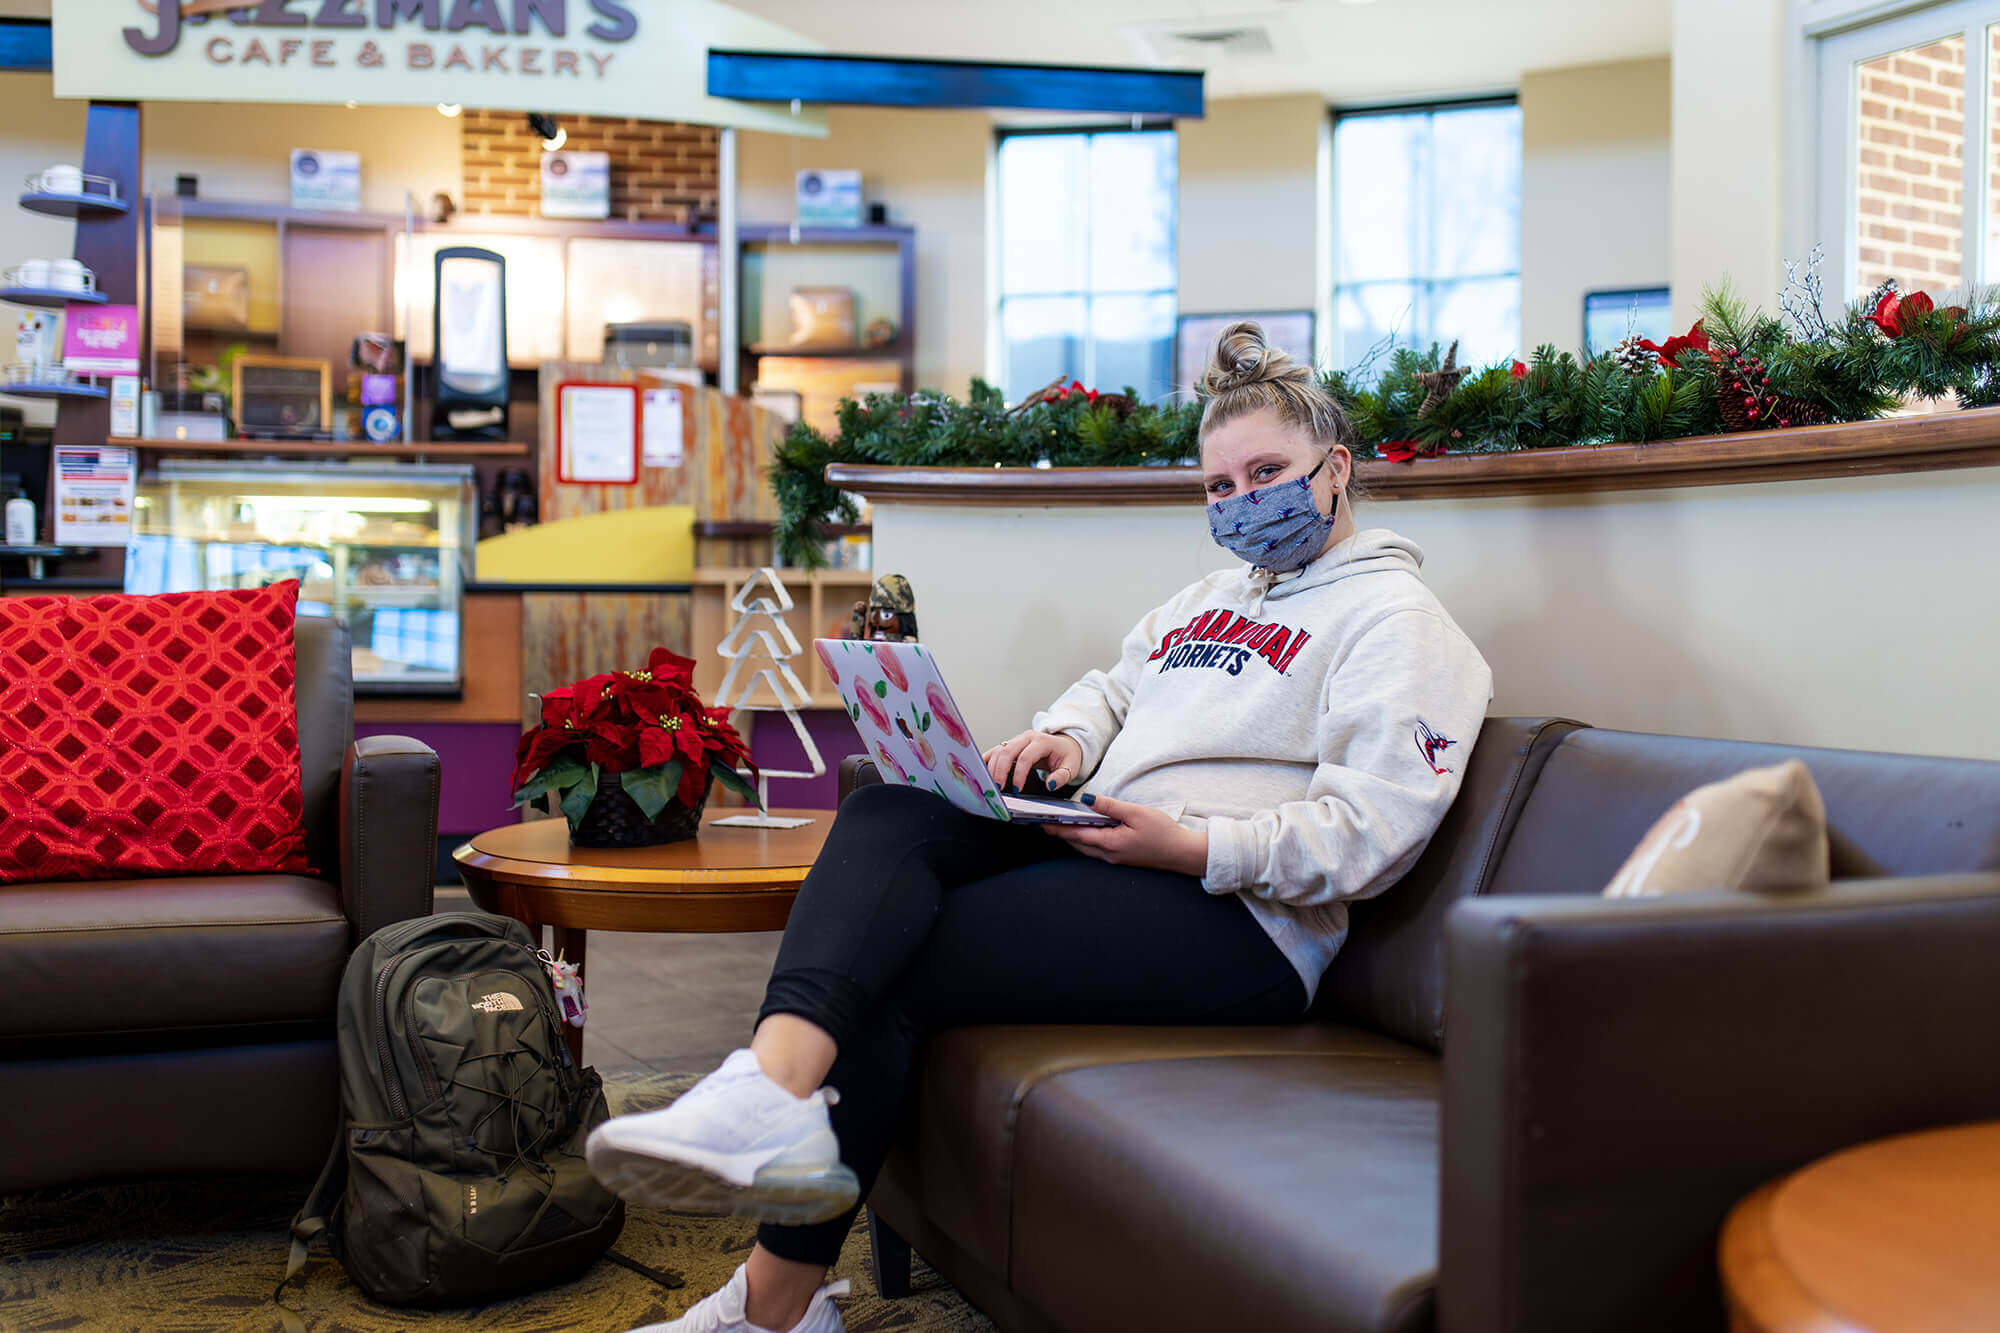 Sign up for Shenandoah’s First J-Term Online Courses Range from Medical Ethics to Marketing 